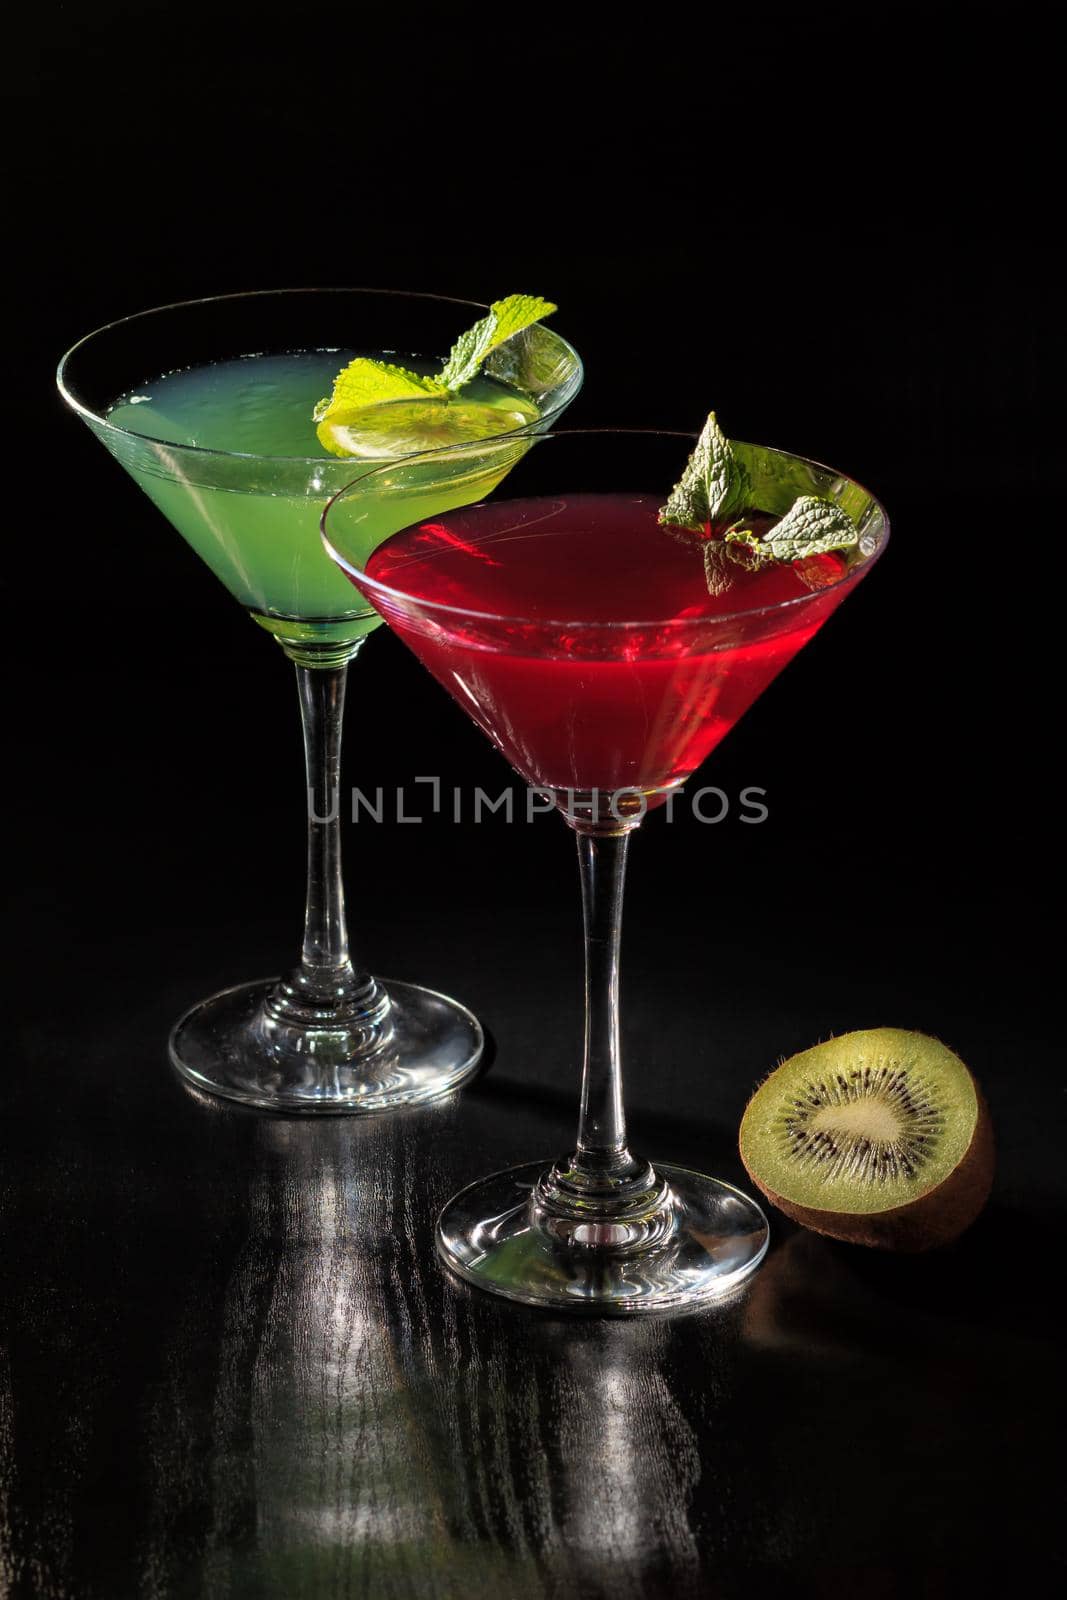 Kiwi and cherry jelly with lime pieces in the glasses topped mint leaves on the black background